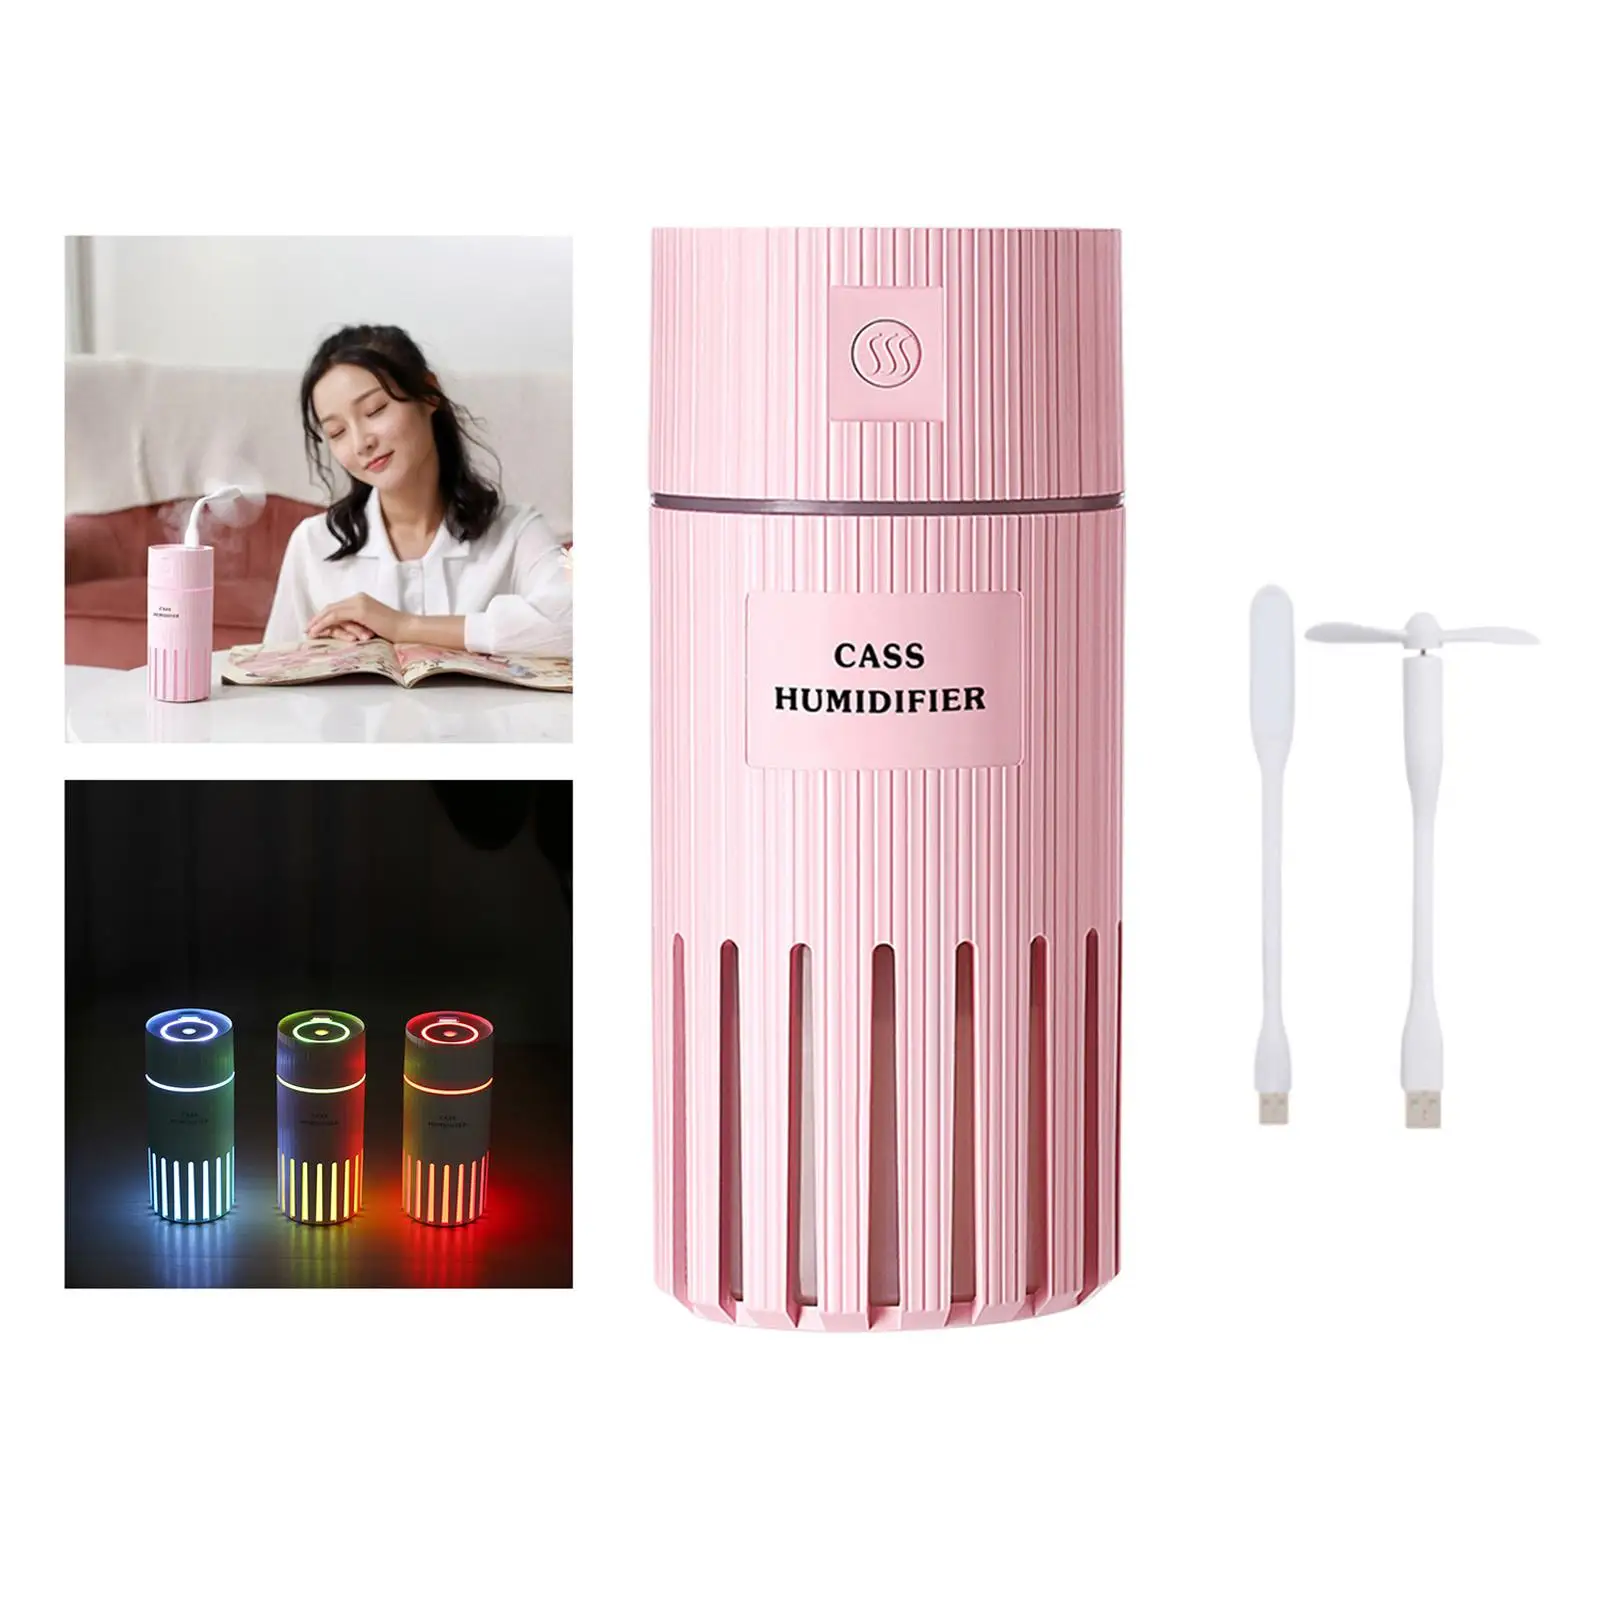 Humidifier Mute Mode Ultrasonic Moisturizing Portable USB Powered Aromatherapy 320ml for Bedroom Home Office Desktop Travel Car